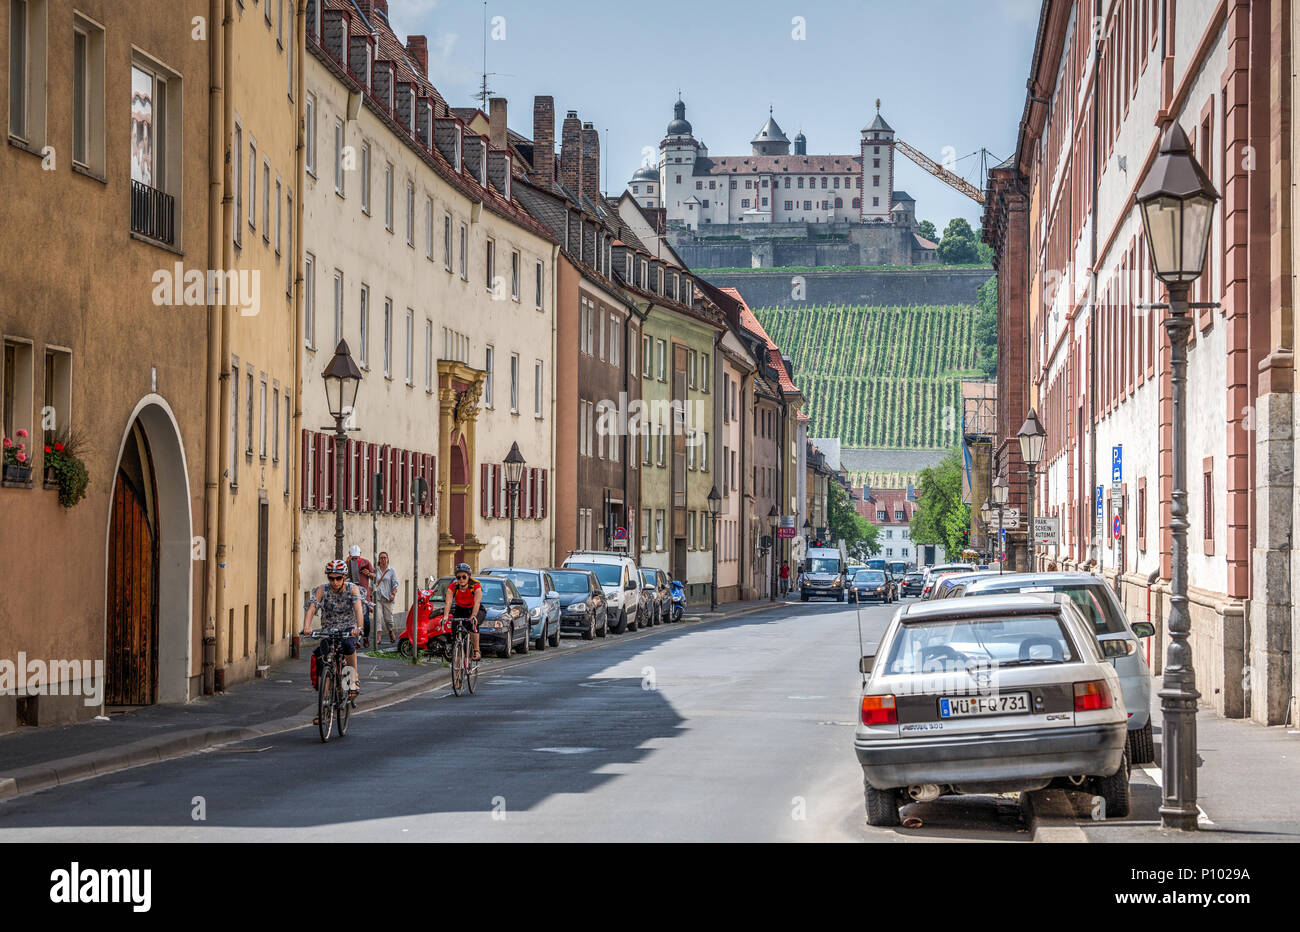 Festung Marienberg, seen from City of Würzburg, Germany Stock Photo